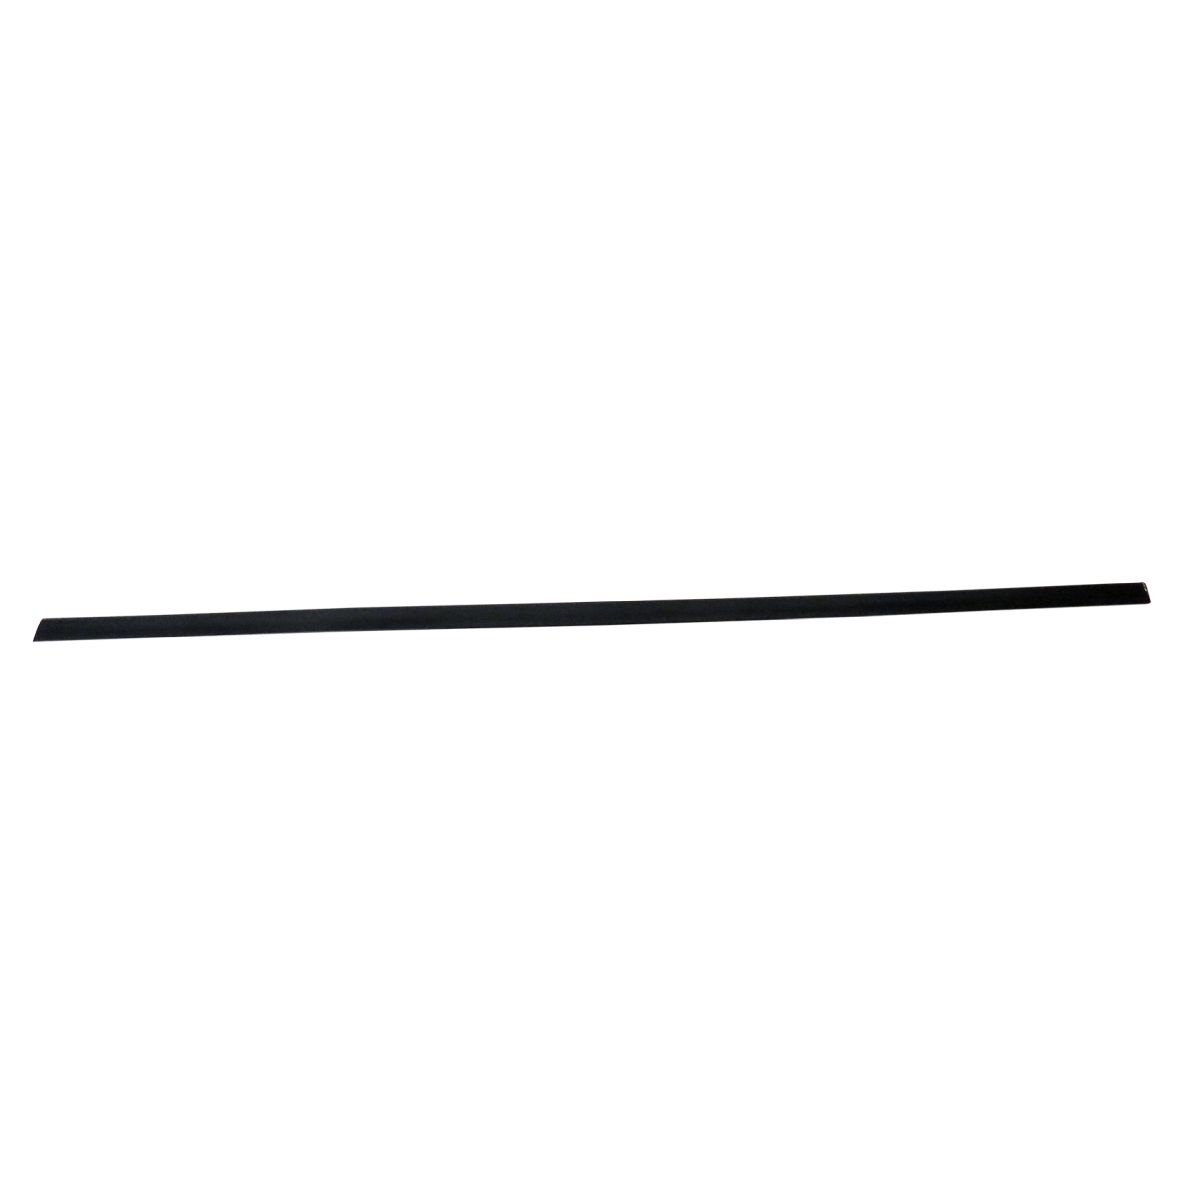 black triangle 3mm 4mm black 25 pieces ABS Plastic welding rods 